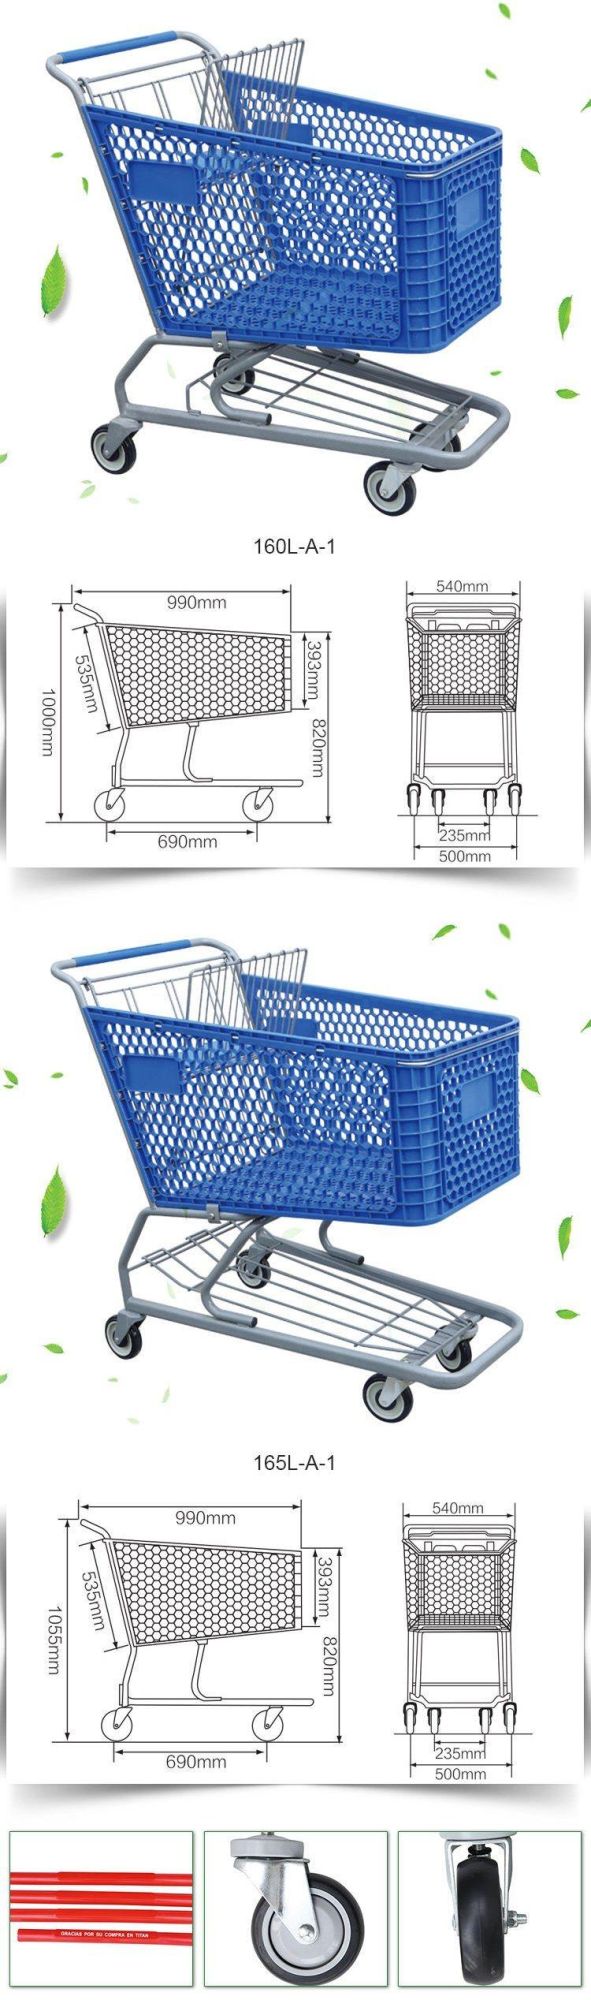 China-Made Grocery Store Shopping Cart with Plastic Basket